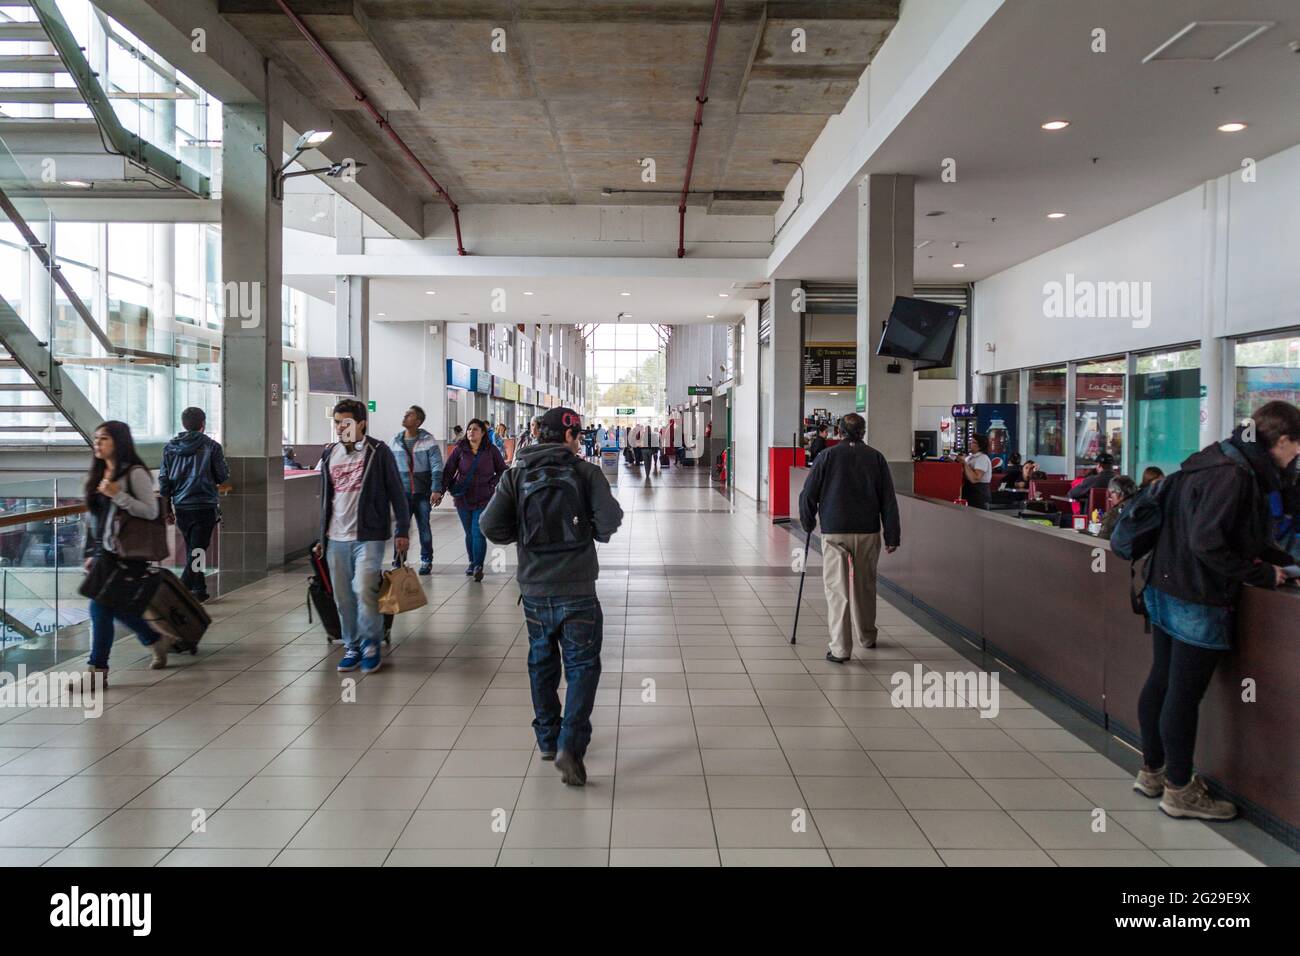 PUERTO MONTT, CHILE - MARCH 1, 2015: Interior of a bus terminal in Puerto Montt, Chile Stock Photo